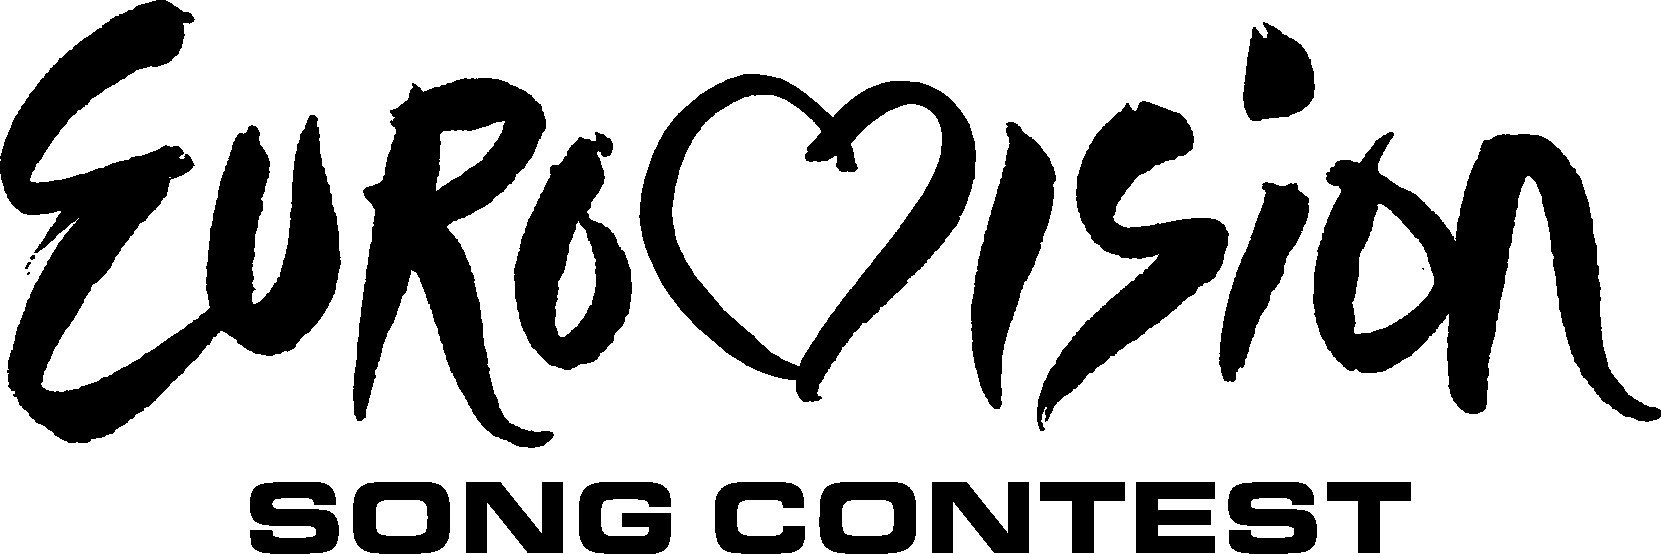 Eurovision Song Contest Logo png